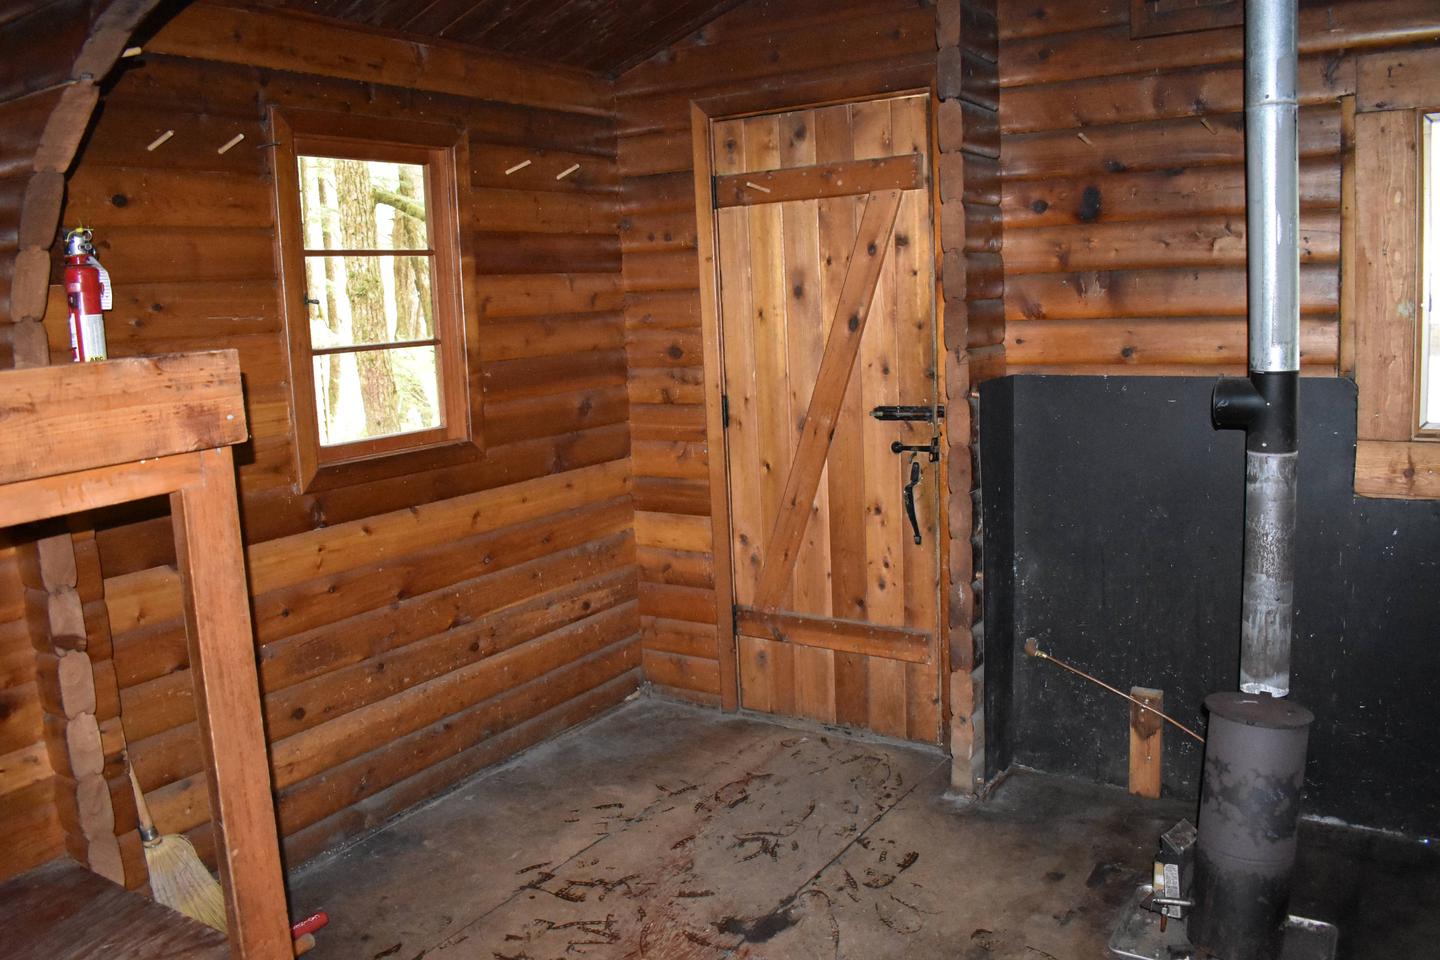 Entrance Area and oil stove